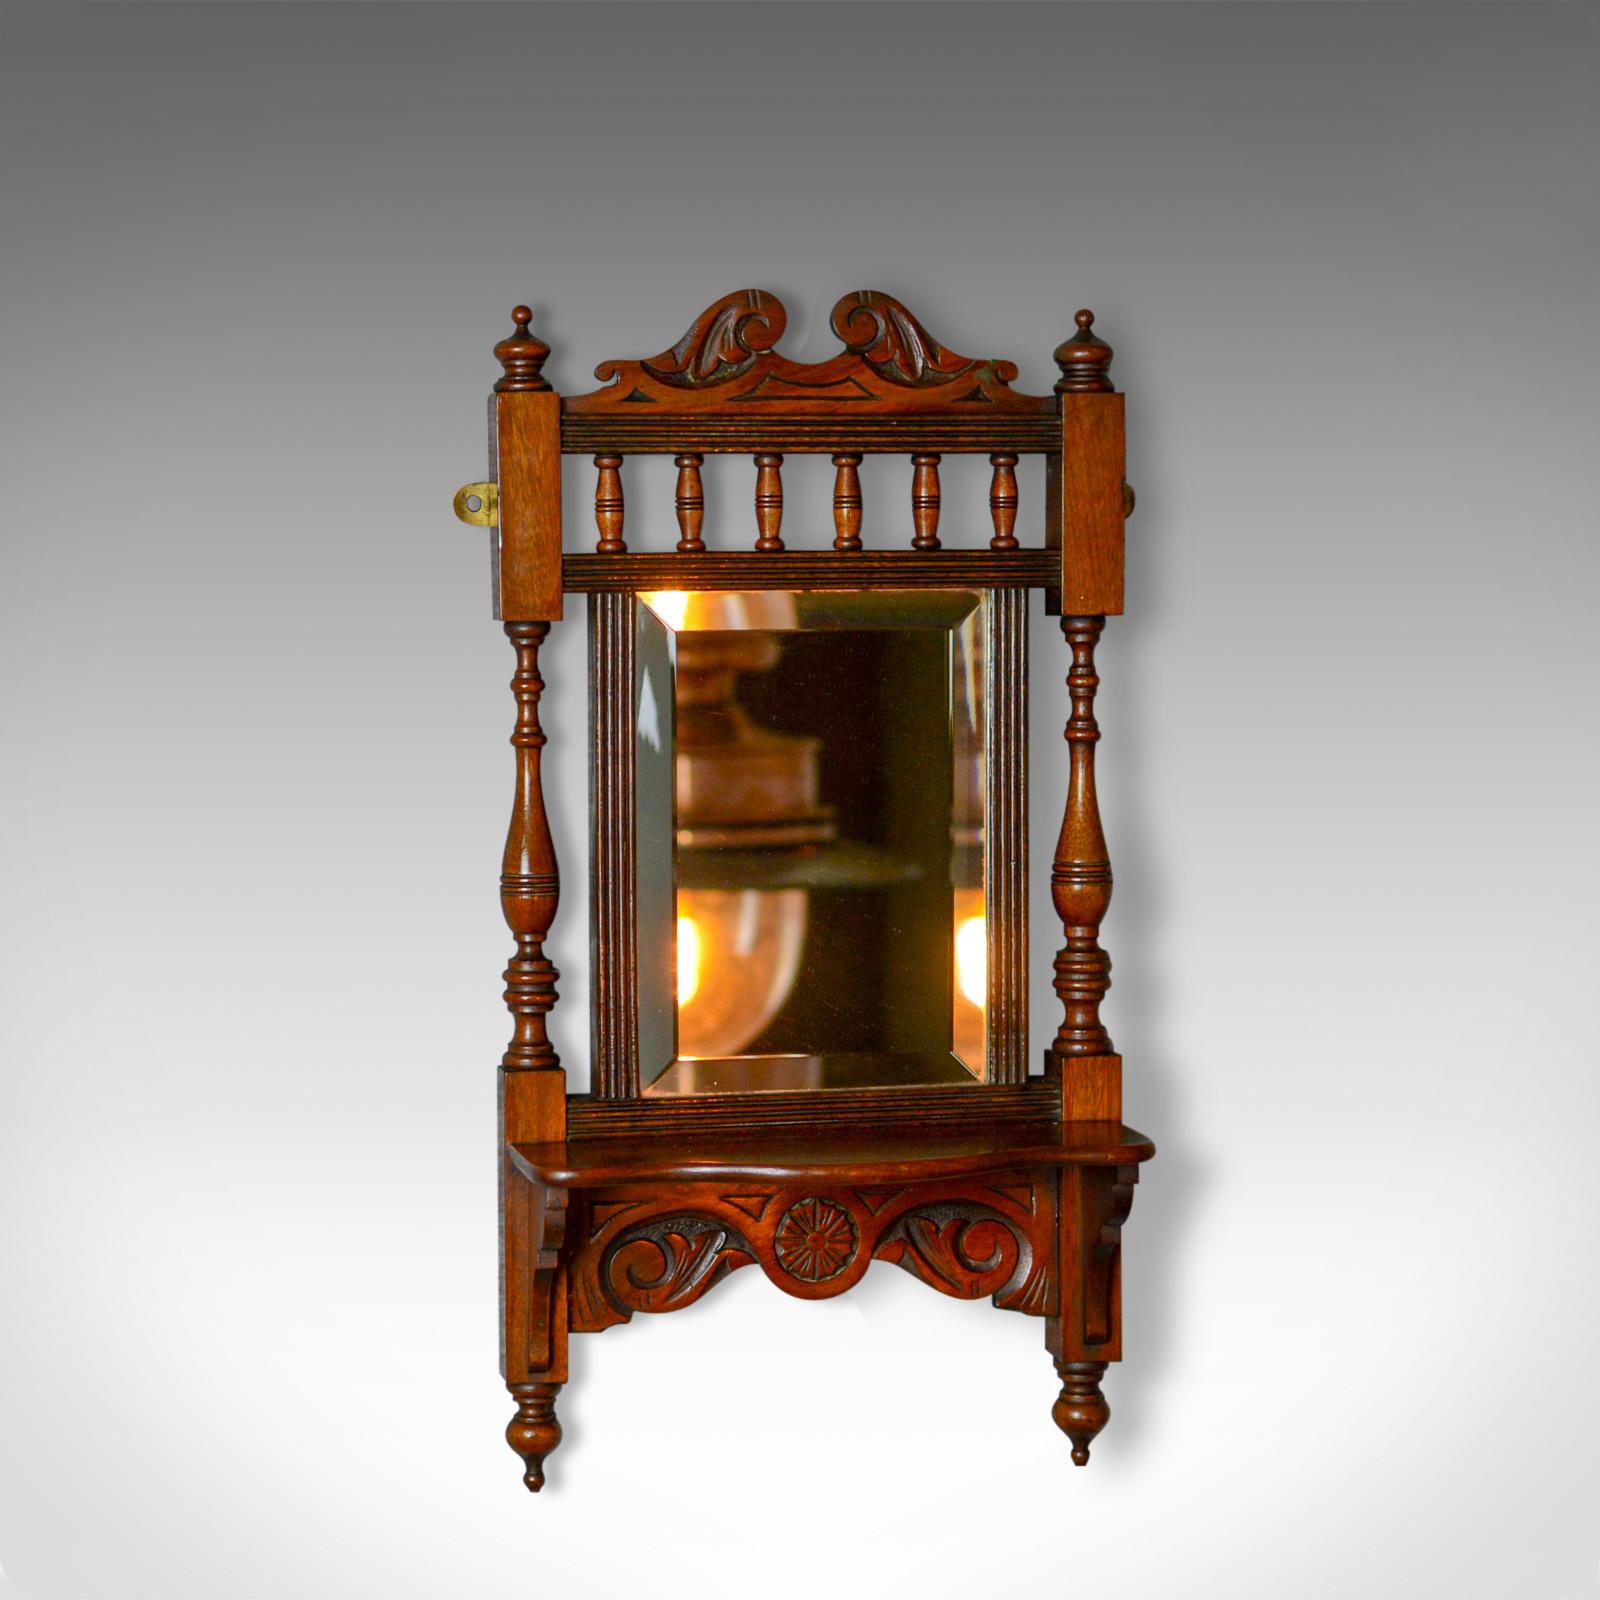 This is an antique valet mirror. An English, Edwardian, small, walnut, wall mirror with shelf dating to the early 20th century, circa 1910.

Delightful biscuit tones to the English walnut
Grain interest and a desirable aged patina
Small wall